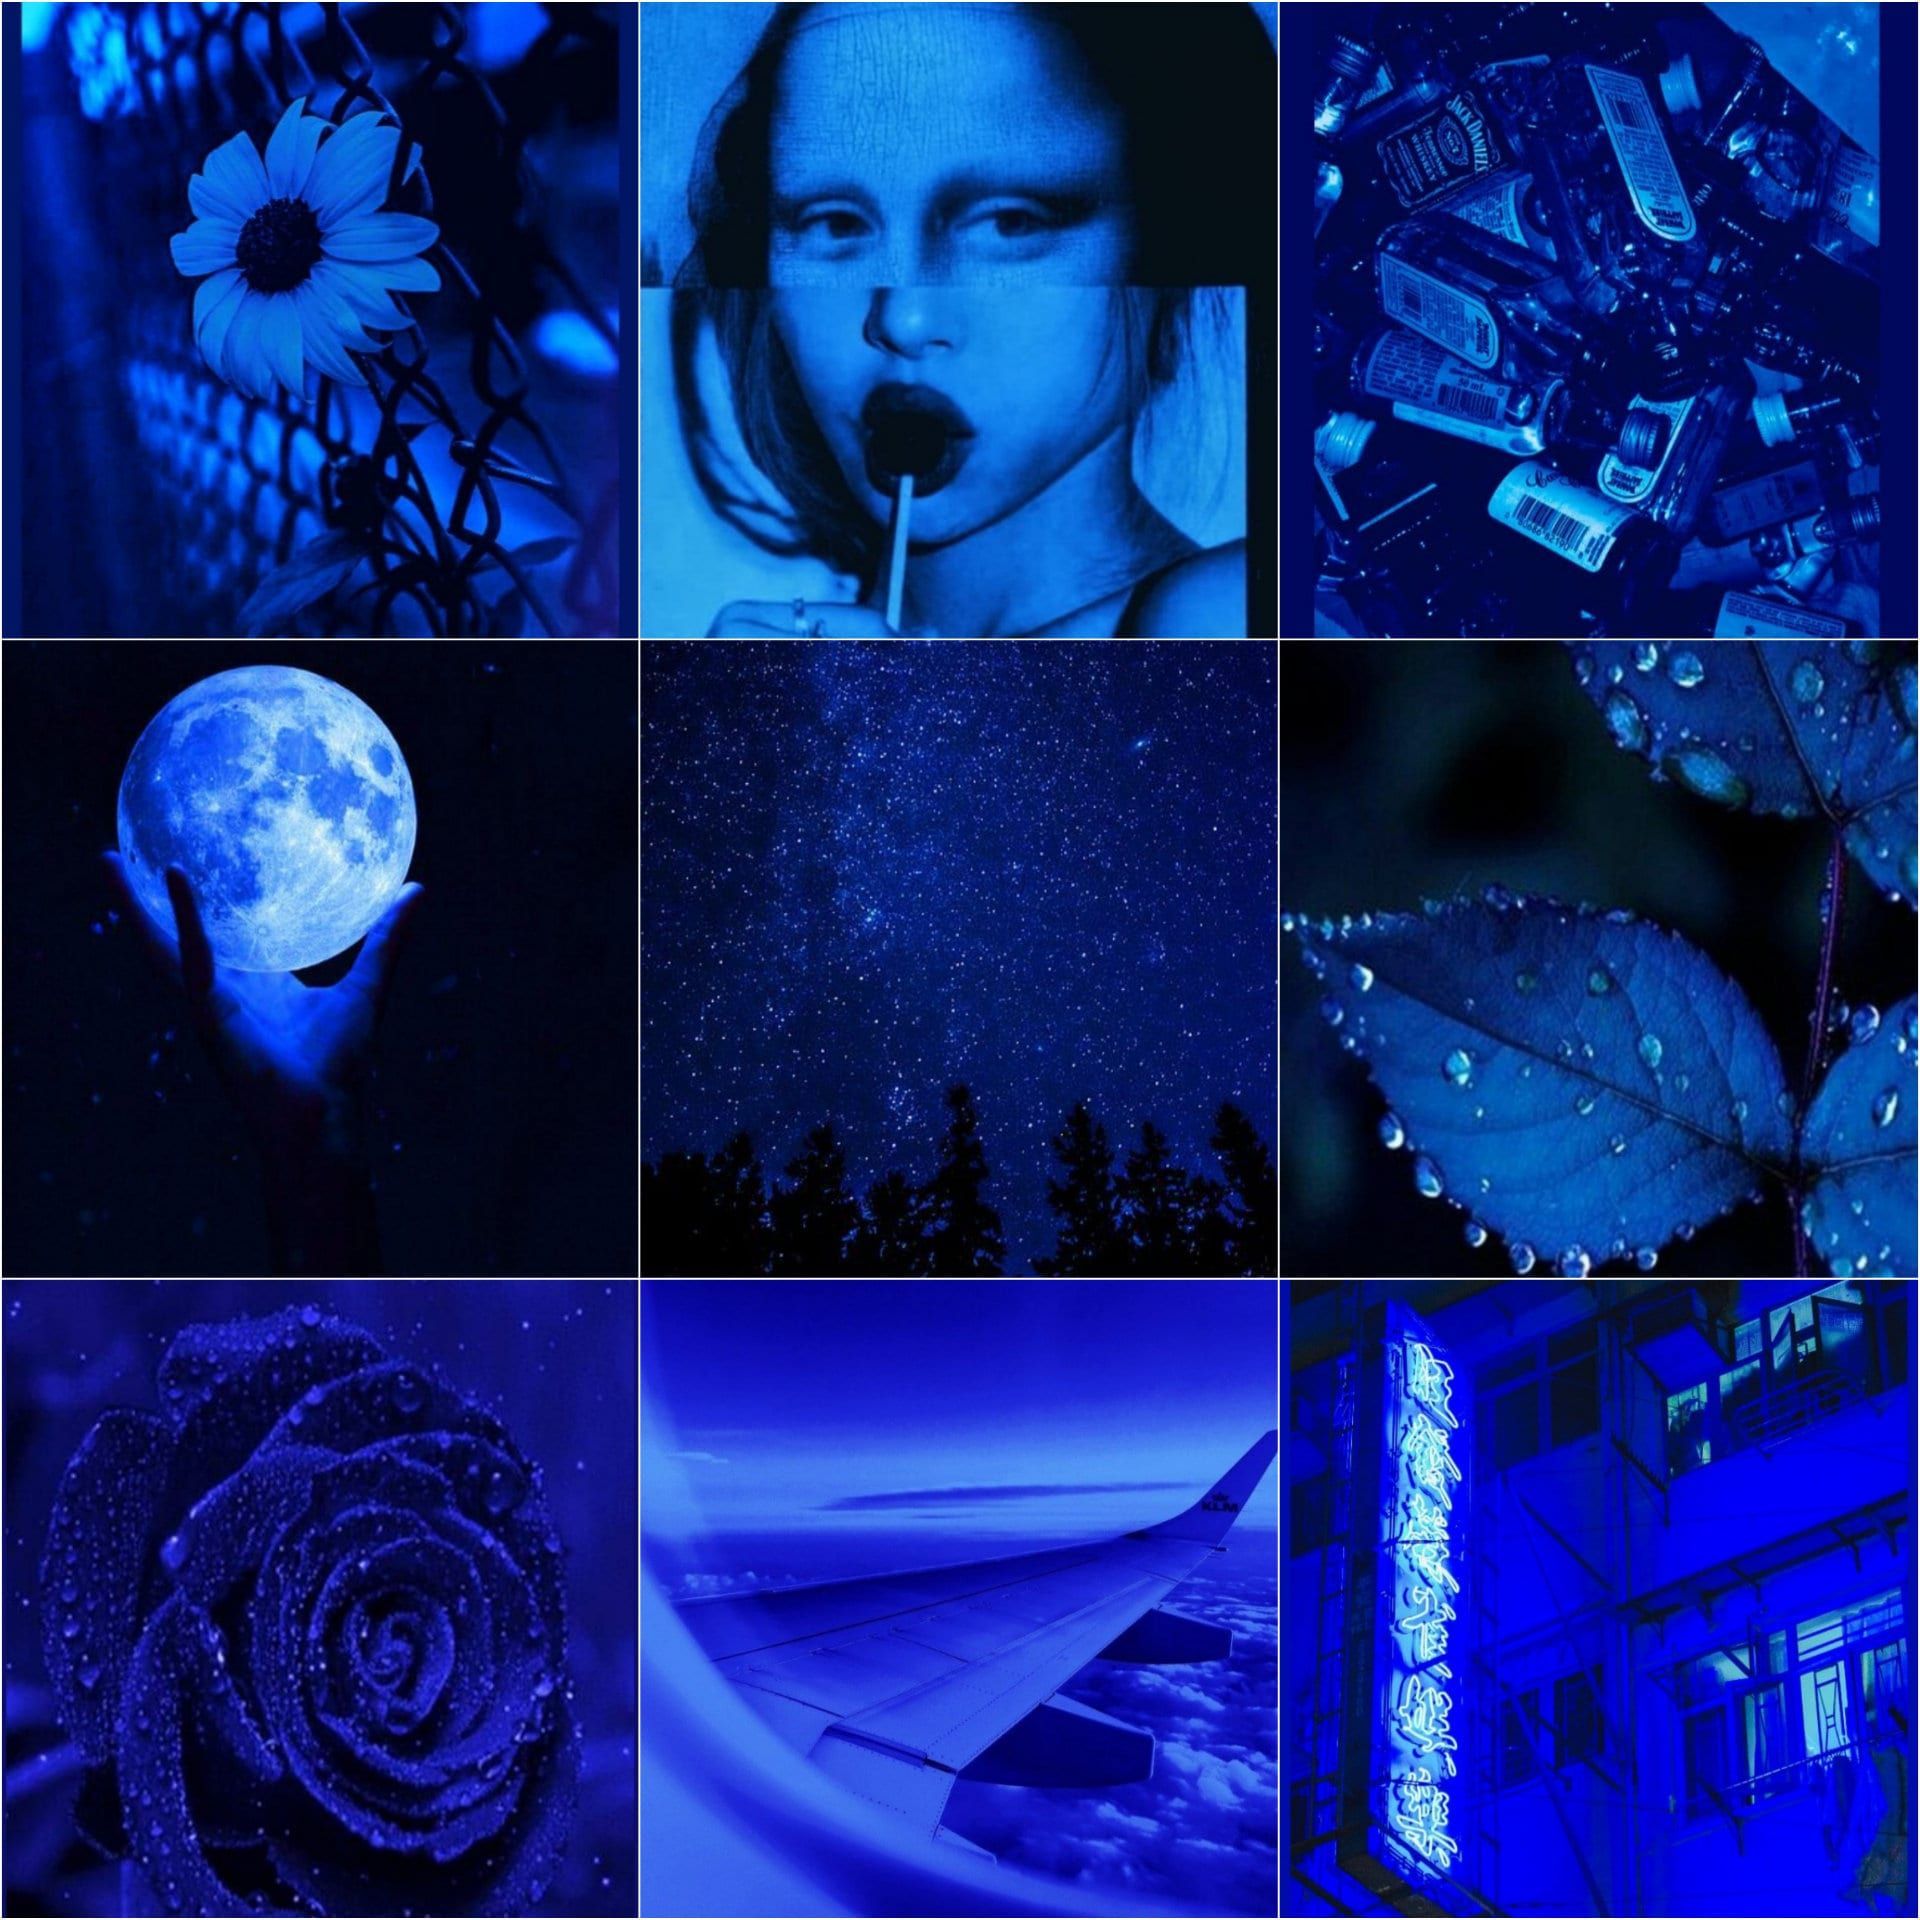 Aesthetic collage of blue images including the moon, flowers, and a cityscape - Dark blue, navy blue